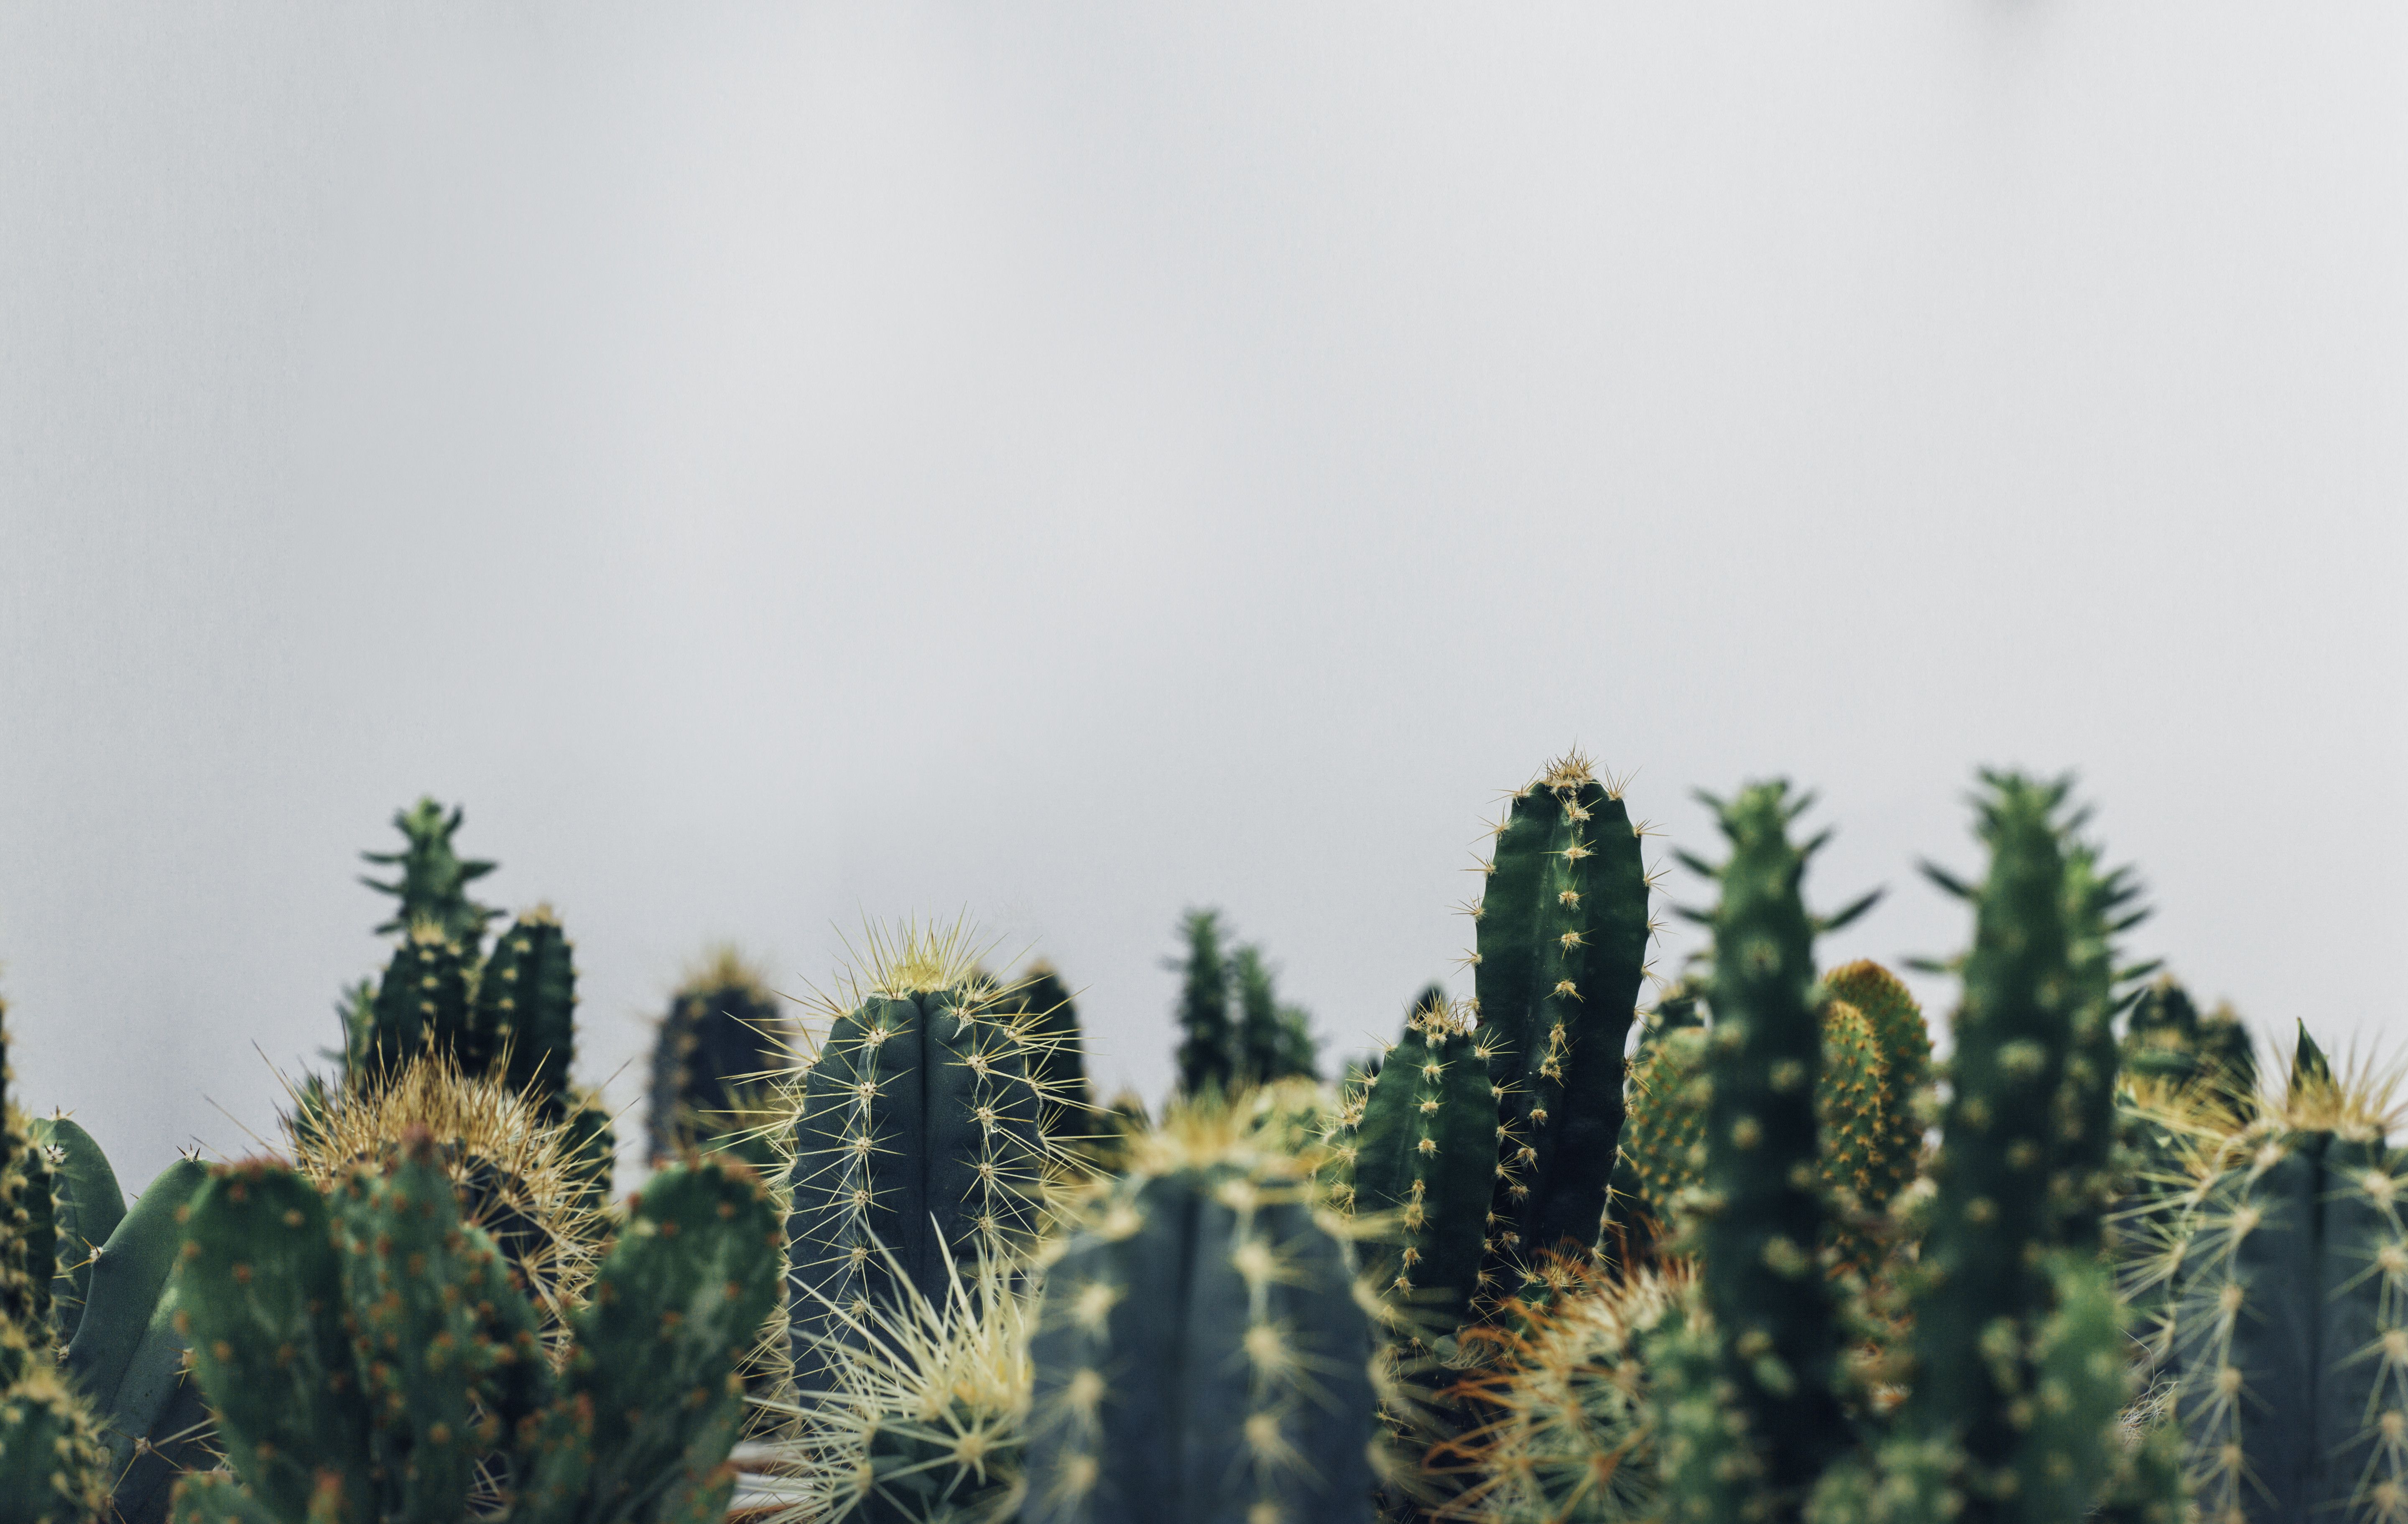 A close up of a group of cacti in front of a white wall - Cactus